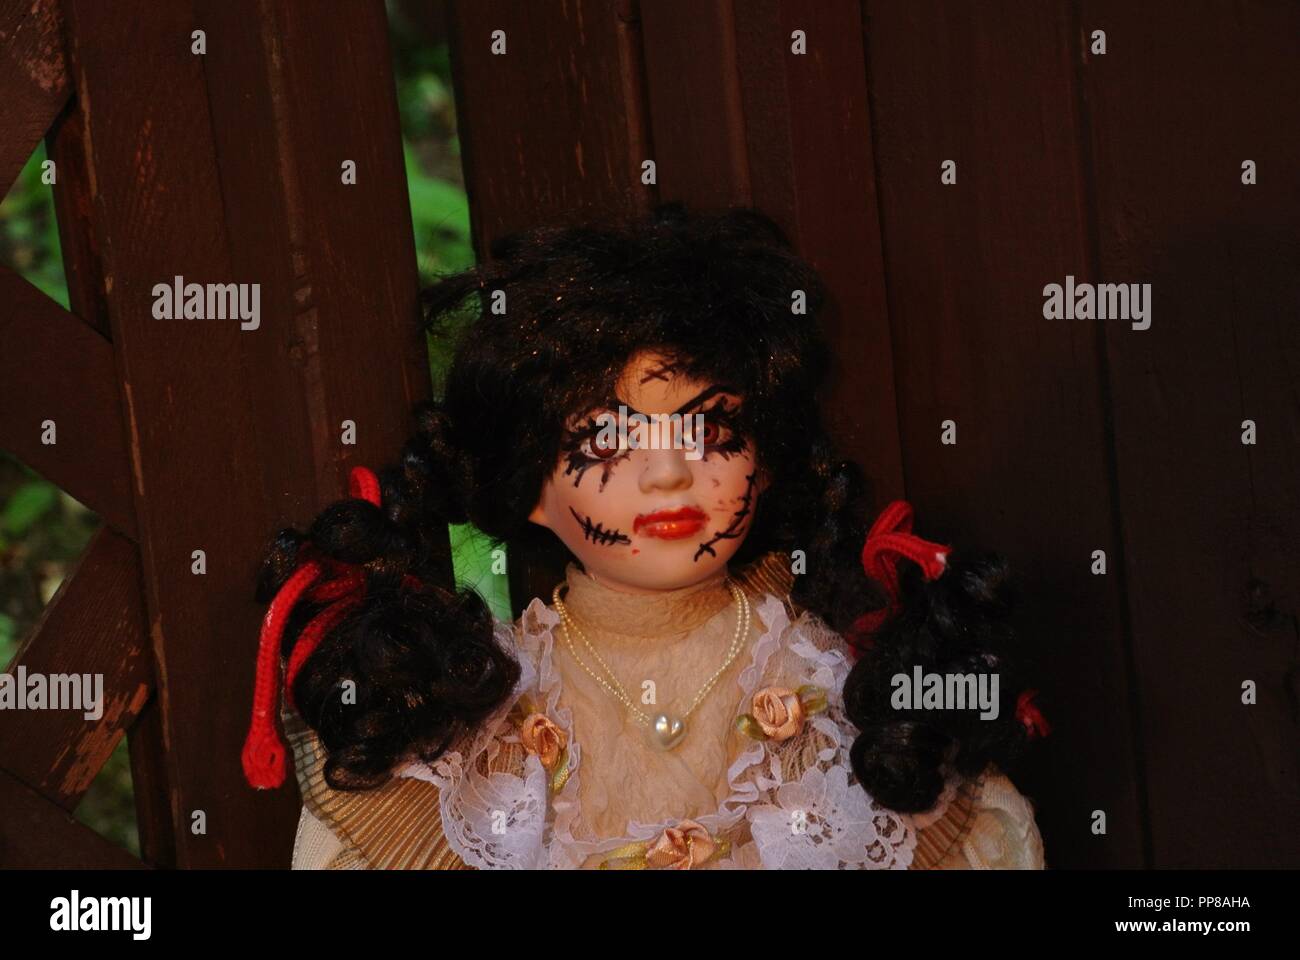 A close up of an antique porcelain doll with long black hair and a scary, beautiful face with scars;, dressed in a white vintage dress, Halloween Stock Photo